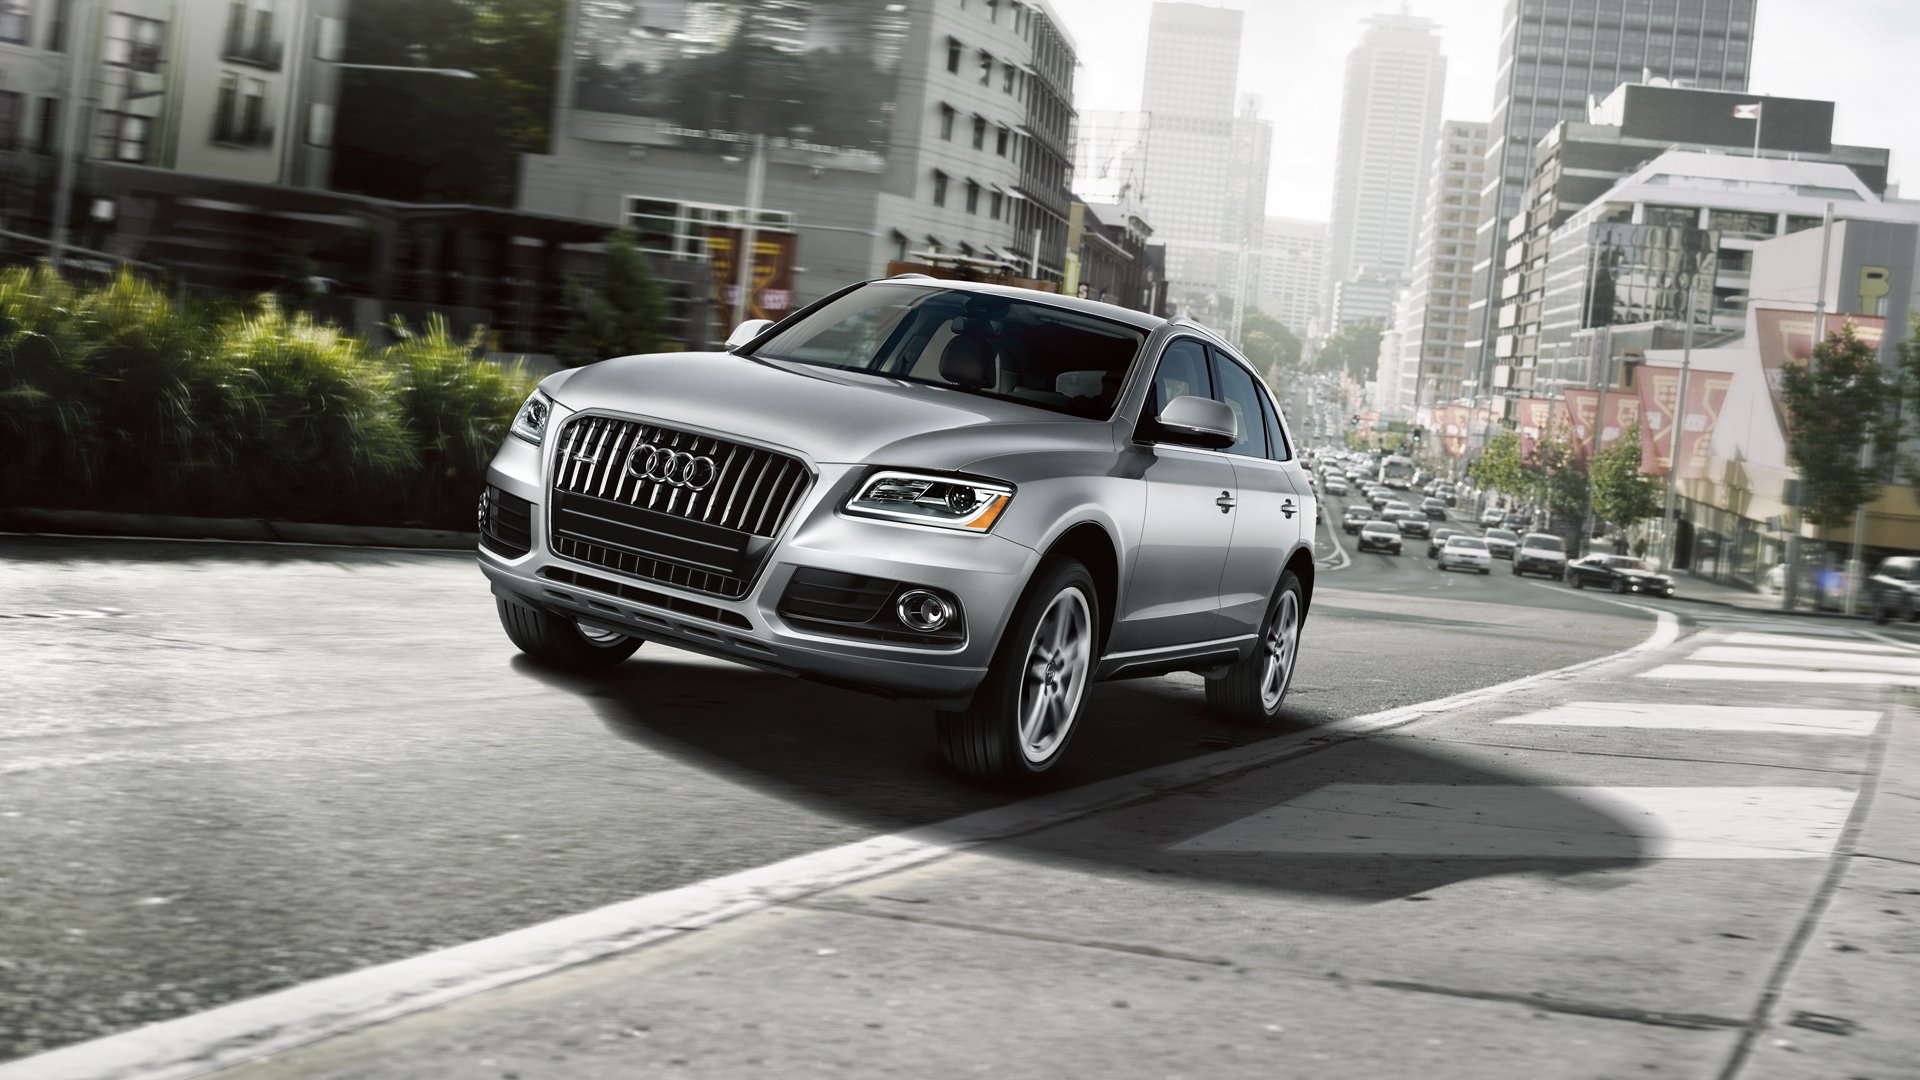 2016 AUDI Q5 EARNS TOP SAFETY PICK+ RATING FROM IIHS